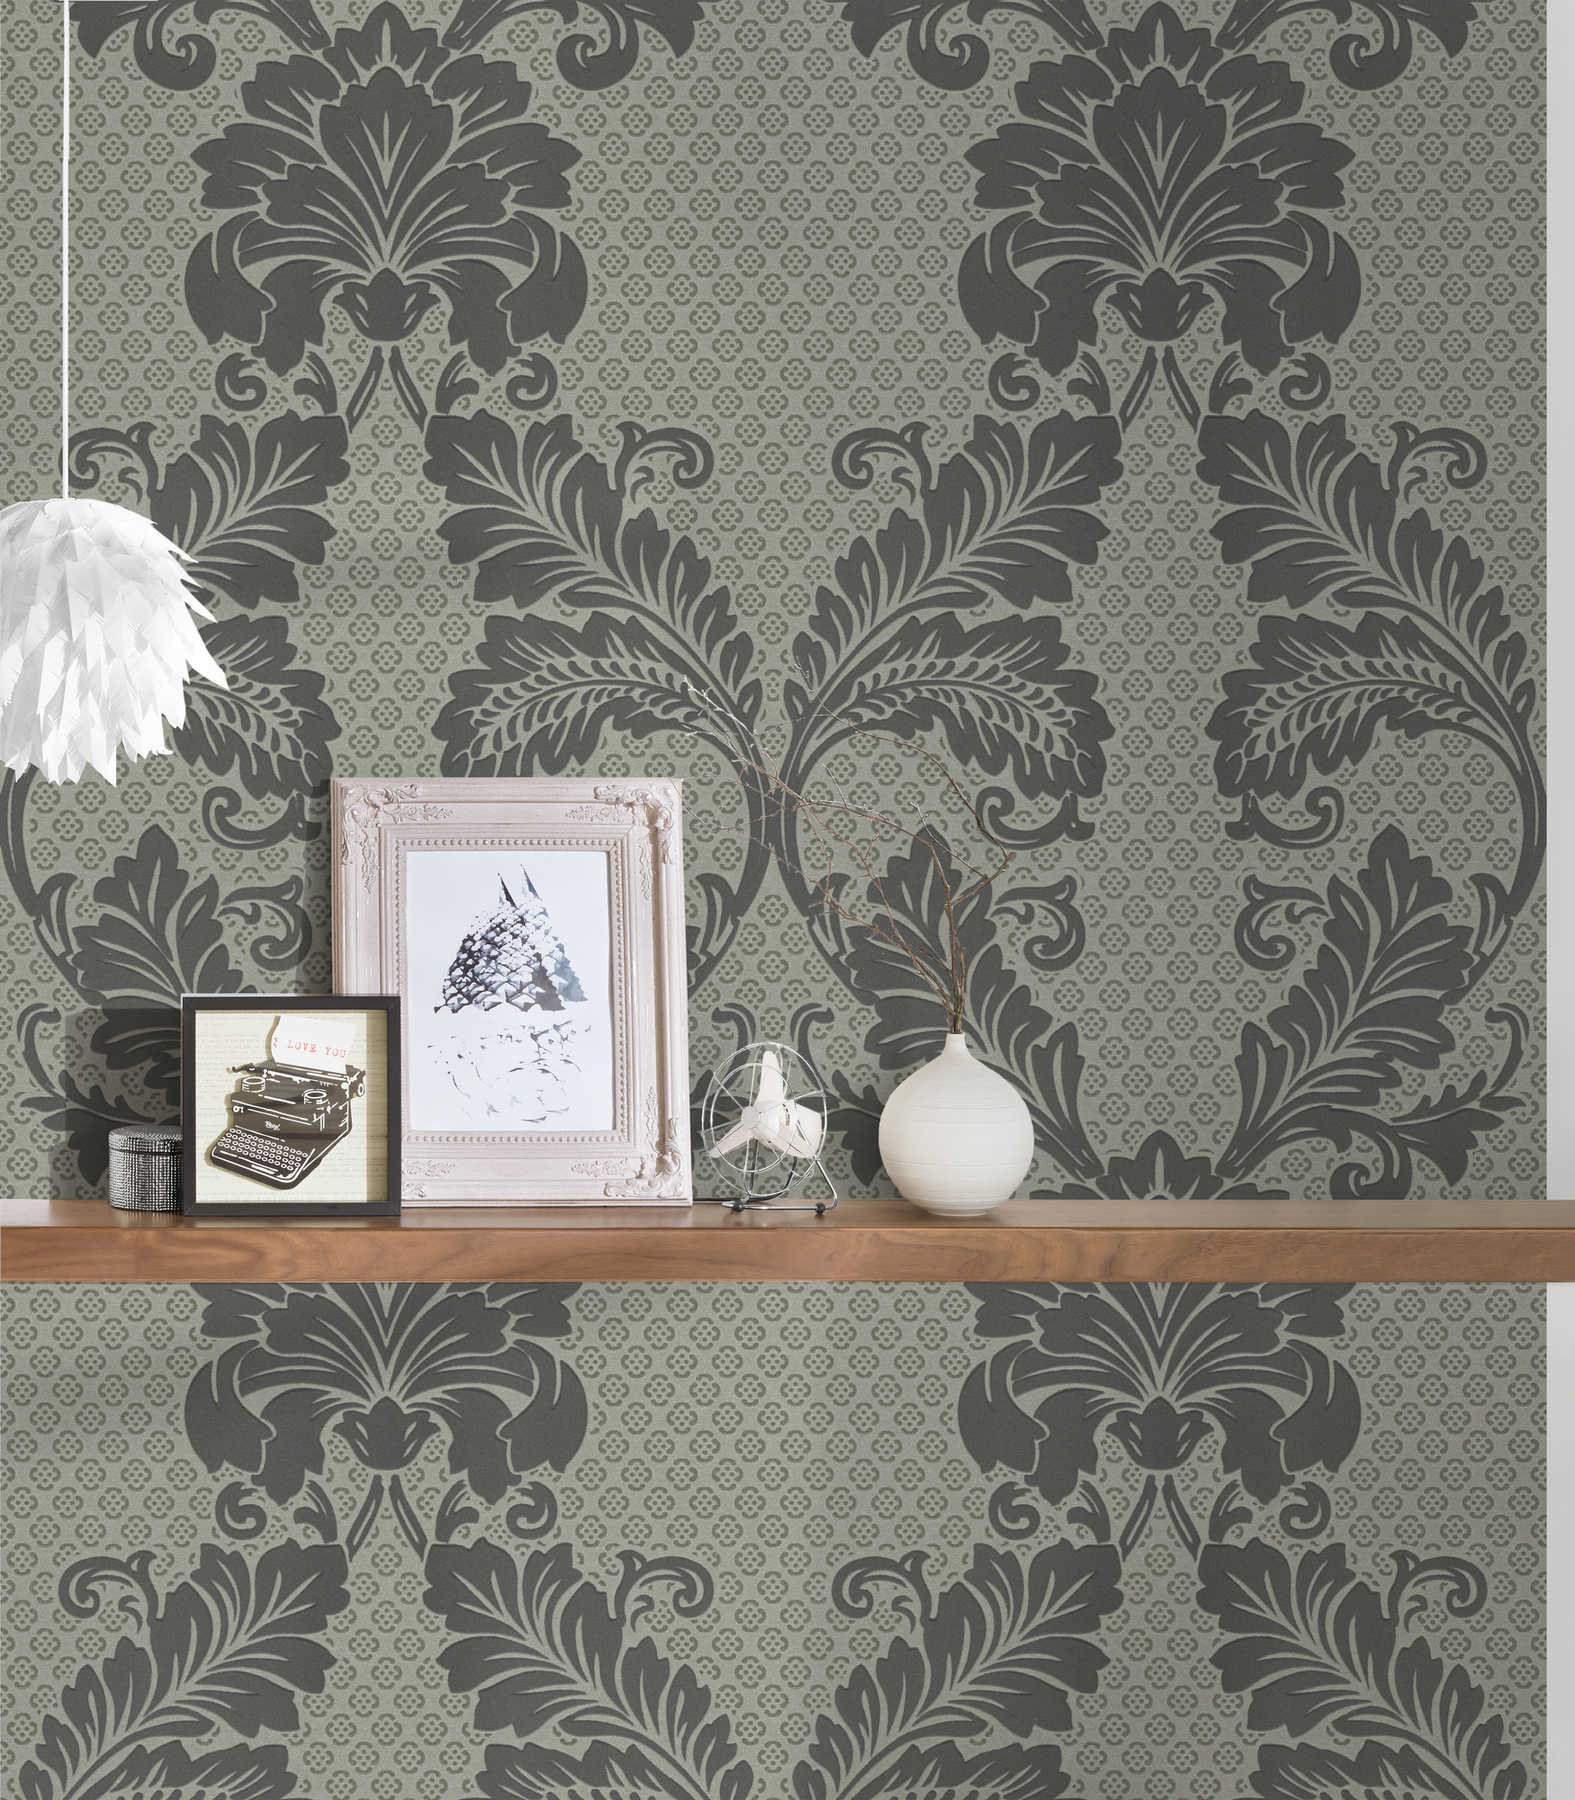             Patterned ornamental wallpaper with large floral motif - grey, bronze
        